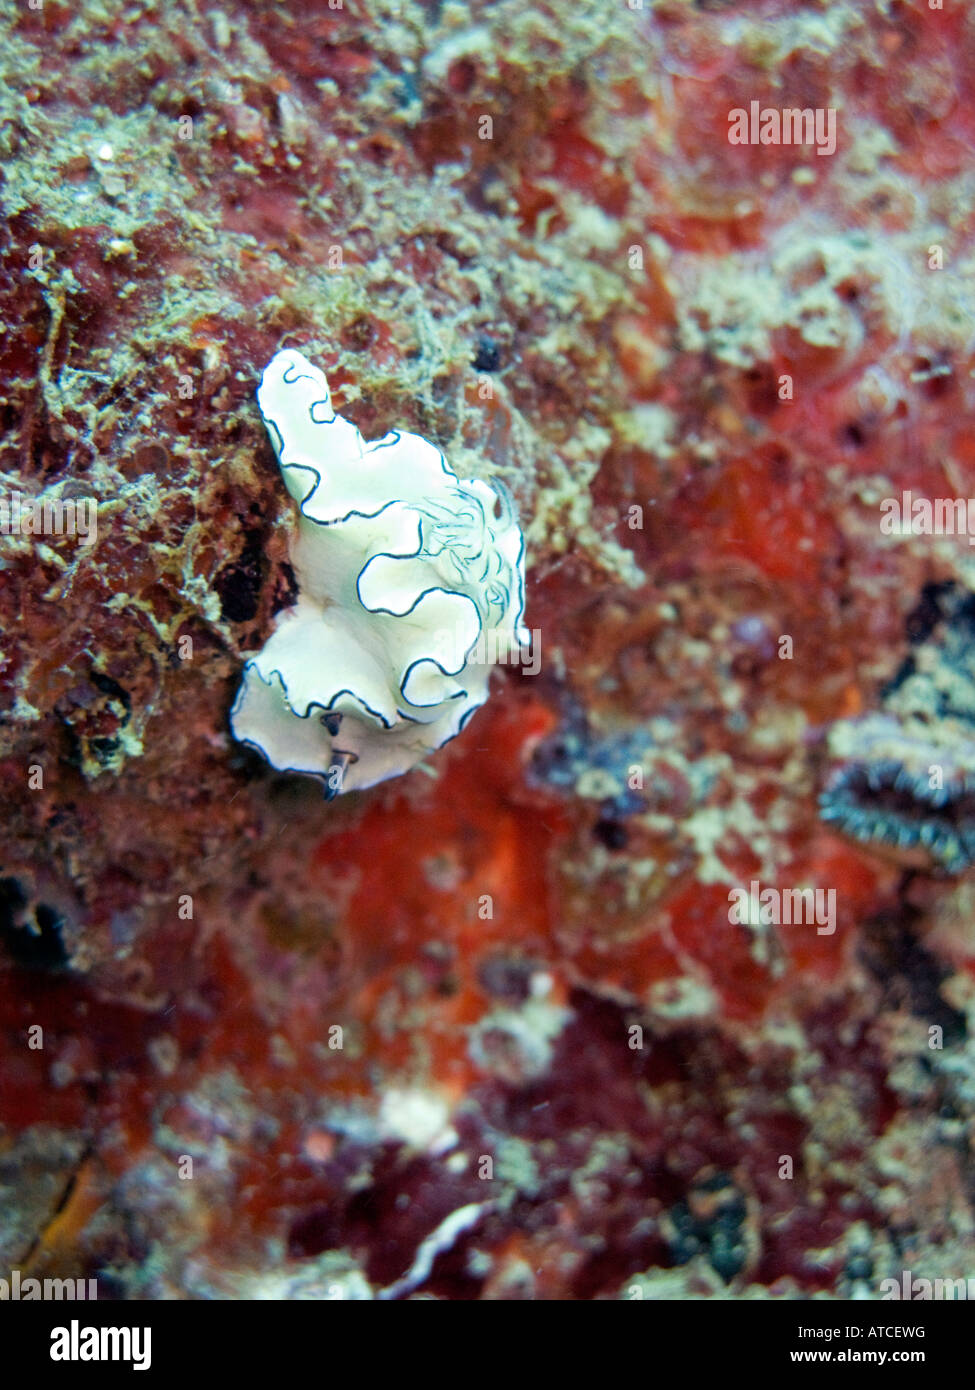 White nudibranch with blue edges Boonsung wreck, Andaman sea, Thailand Stock Photo